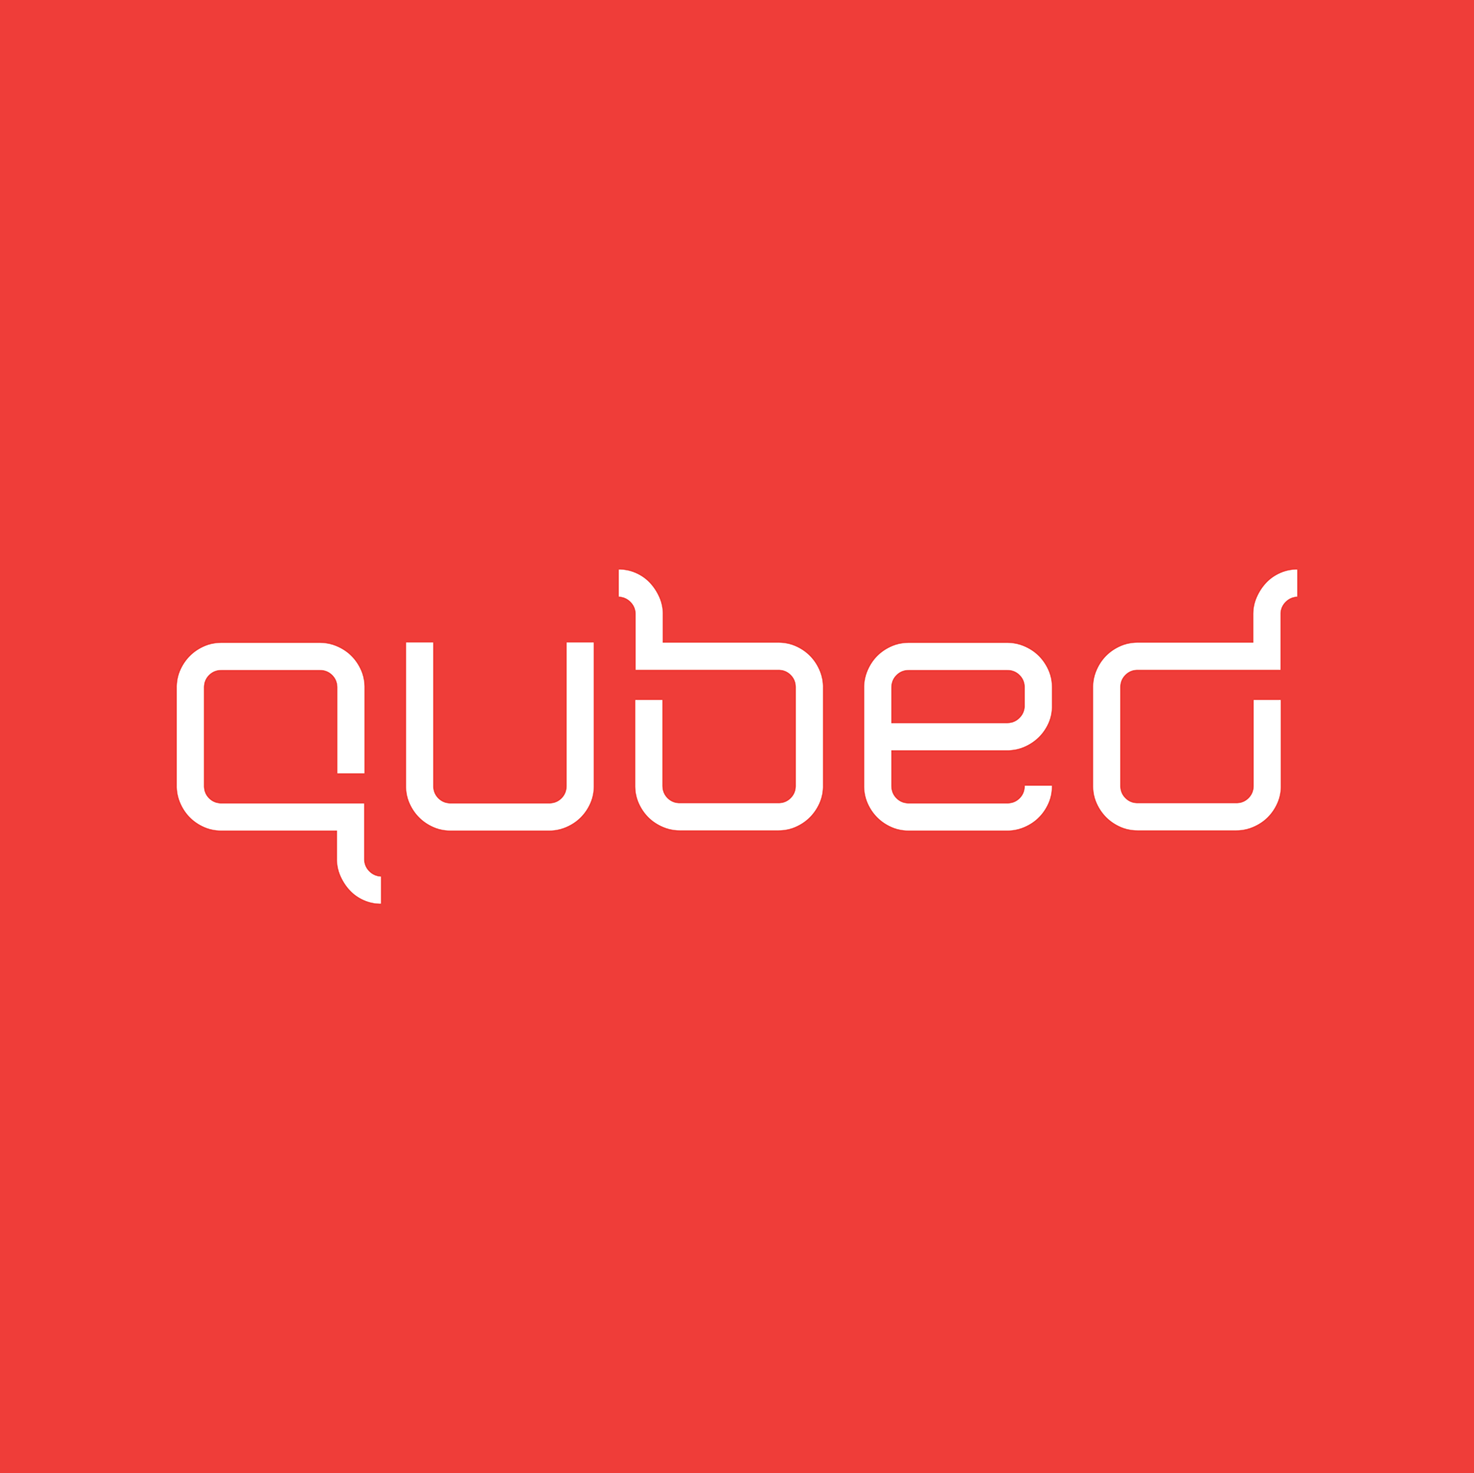 Qubed Agency